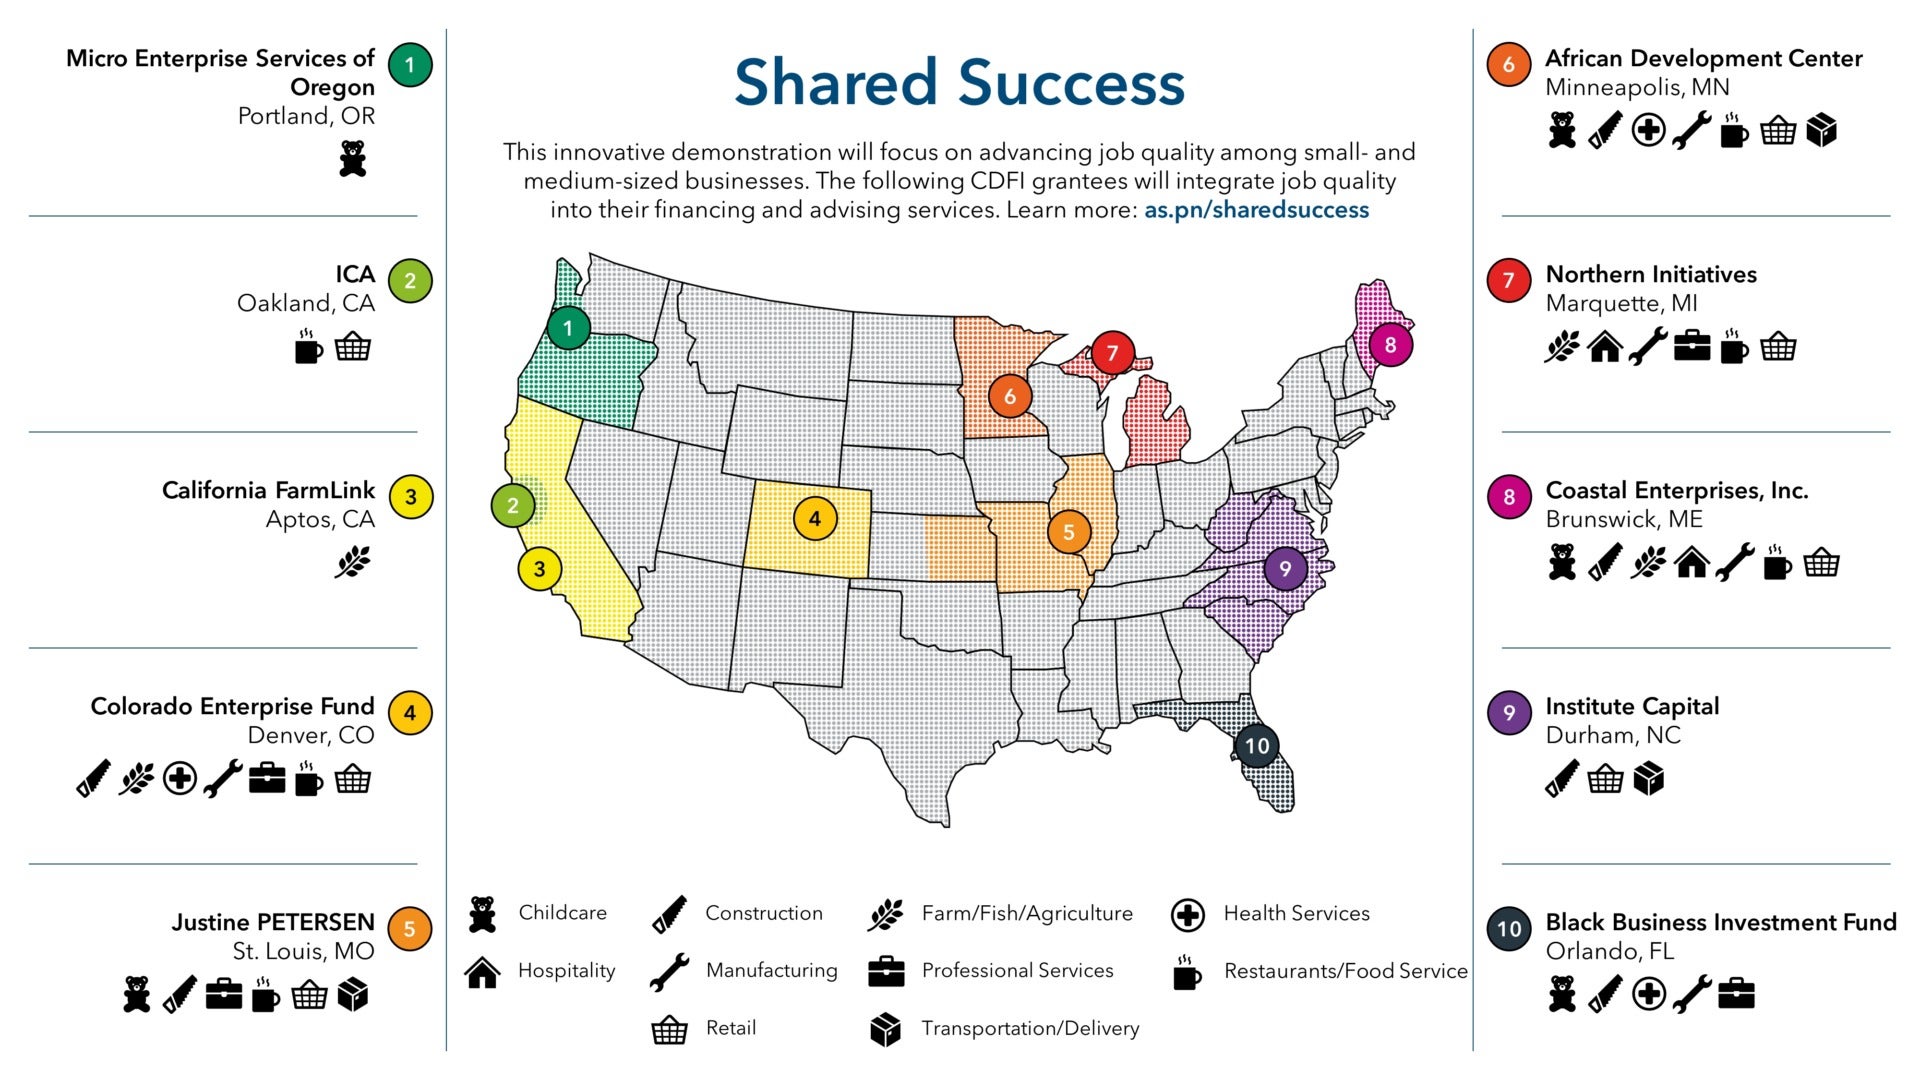 Map of the United States showing Shared Success grantee organizations and the regions and sectors they serve. For full information, visit https://as.pn/sharedsuccess